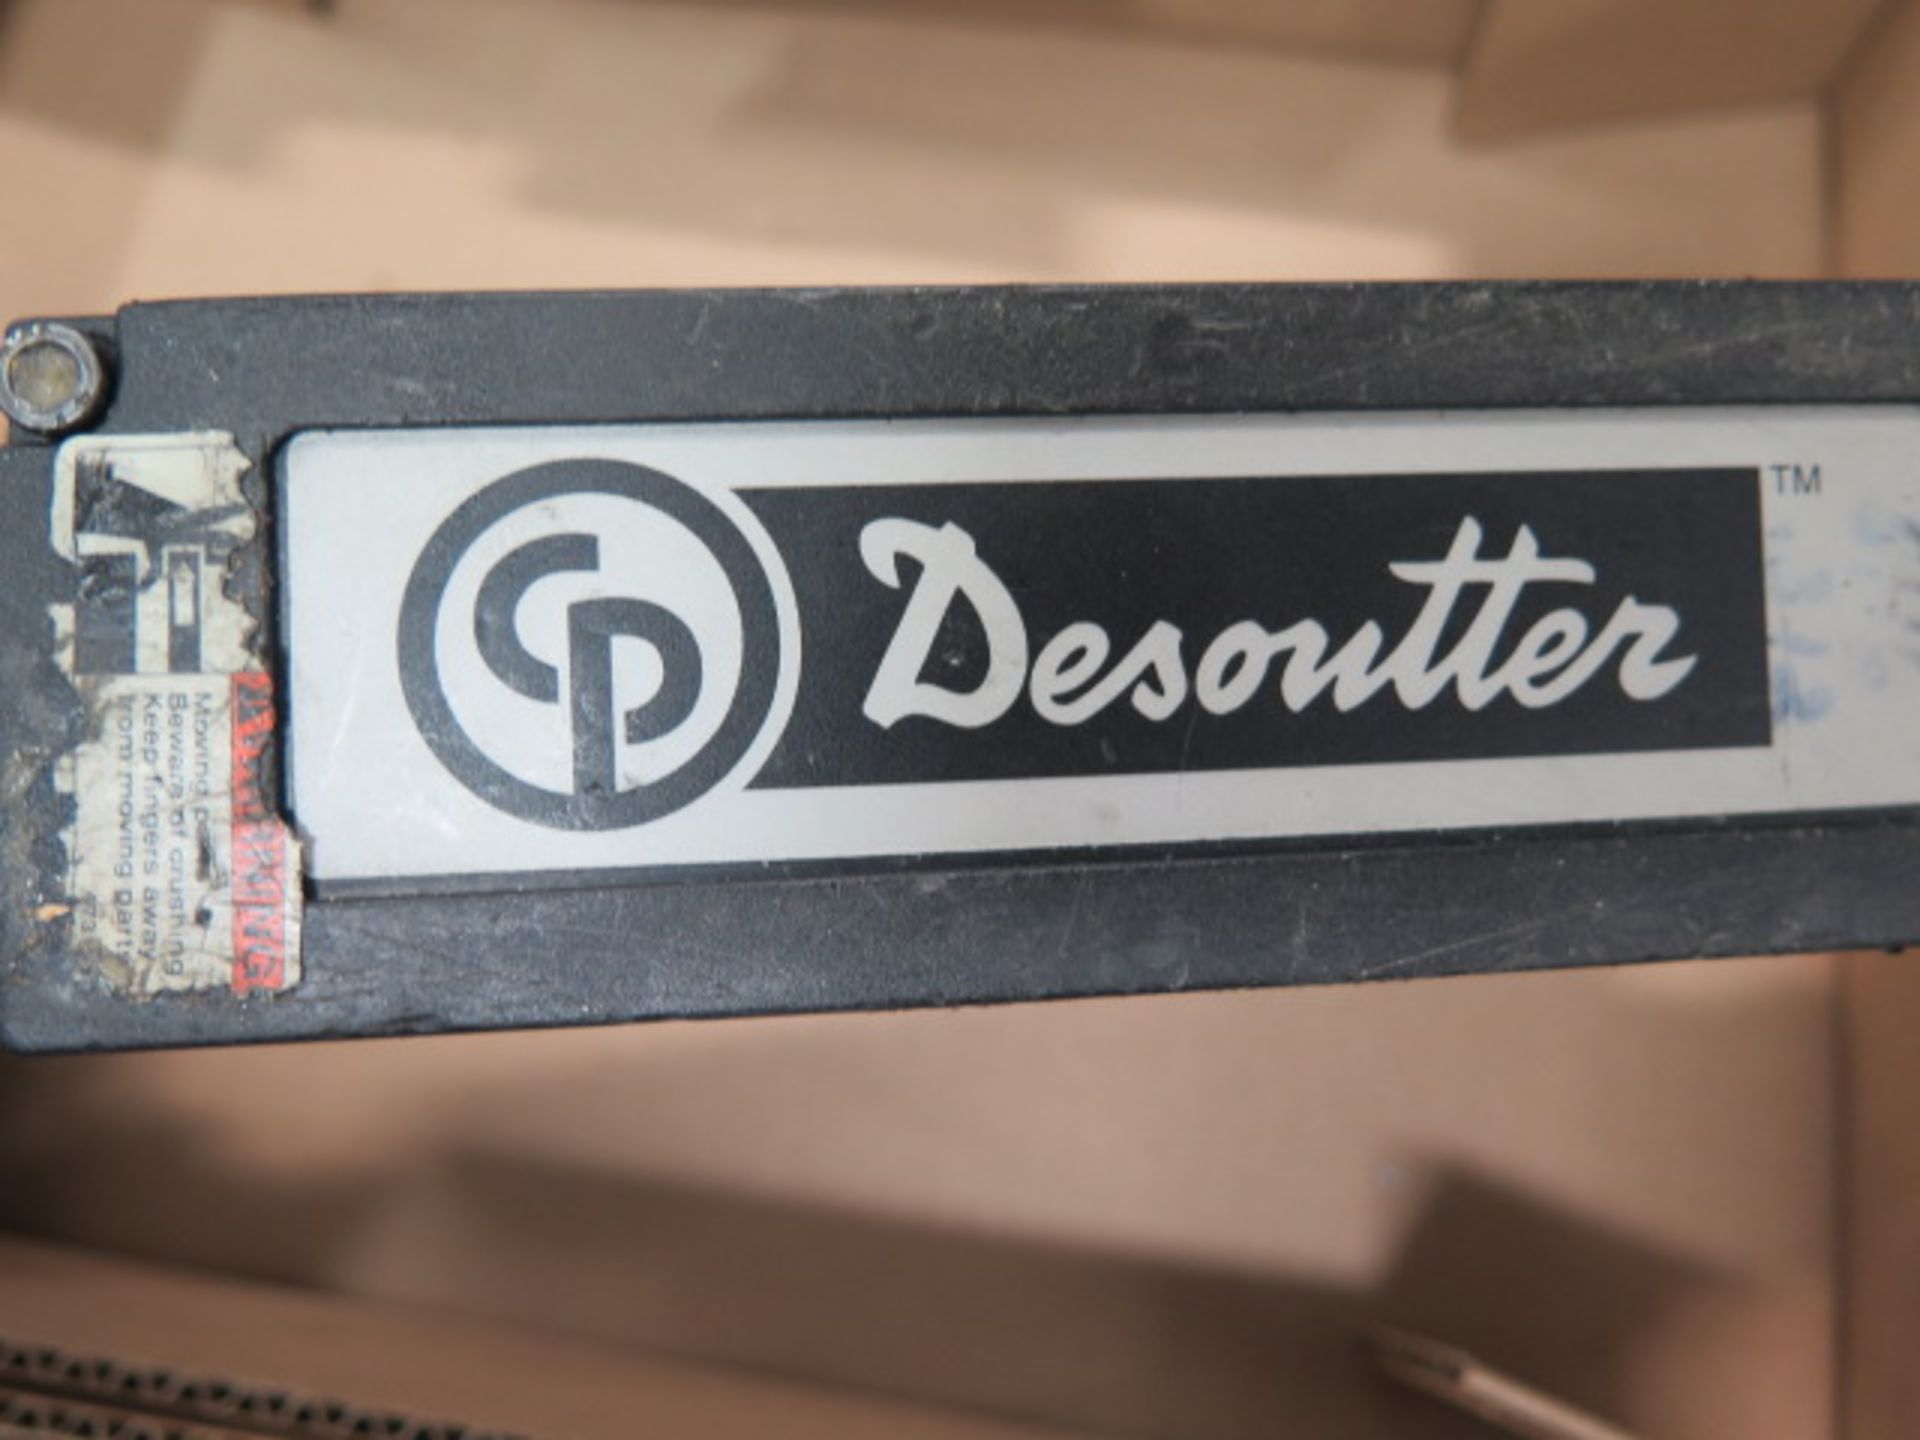 Desoutter CFD-DR750-P Pneumatic Drilling Unit (SOLD AS-IS - NO WARRANTY) - Image 6 of 6